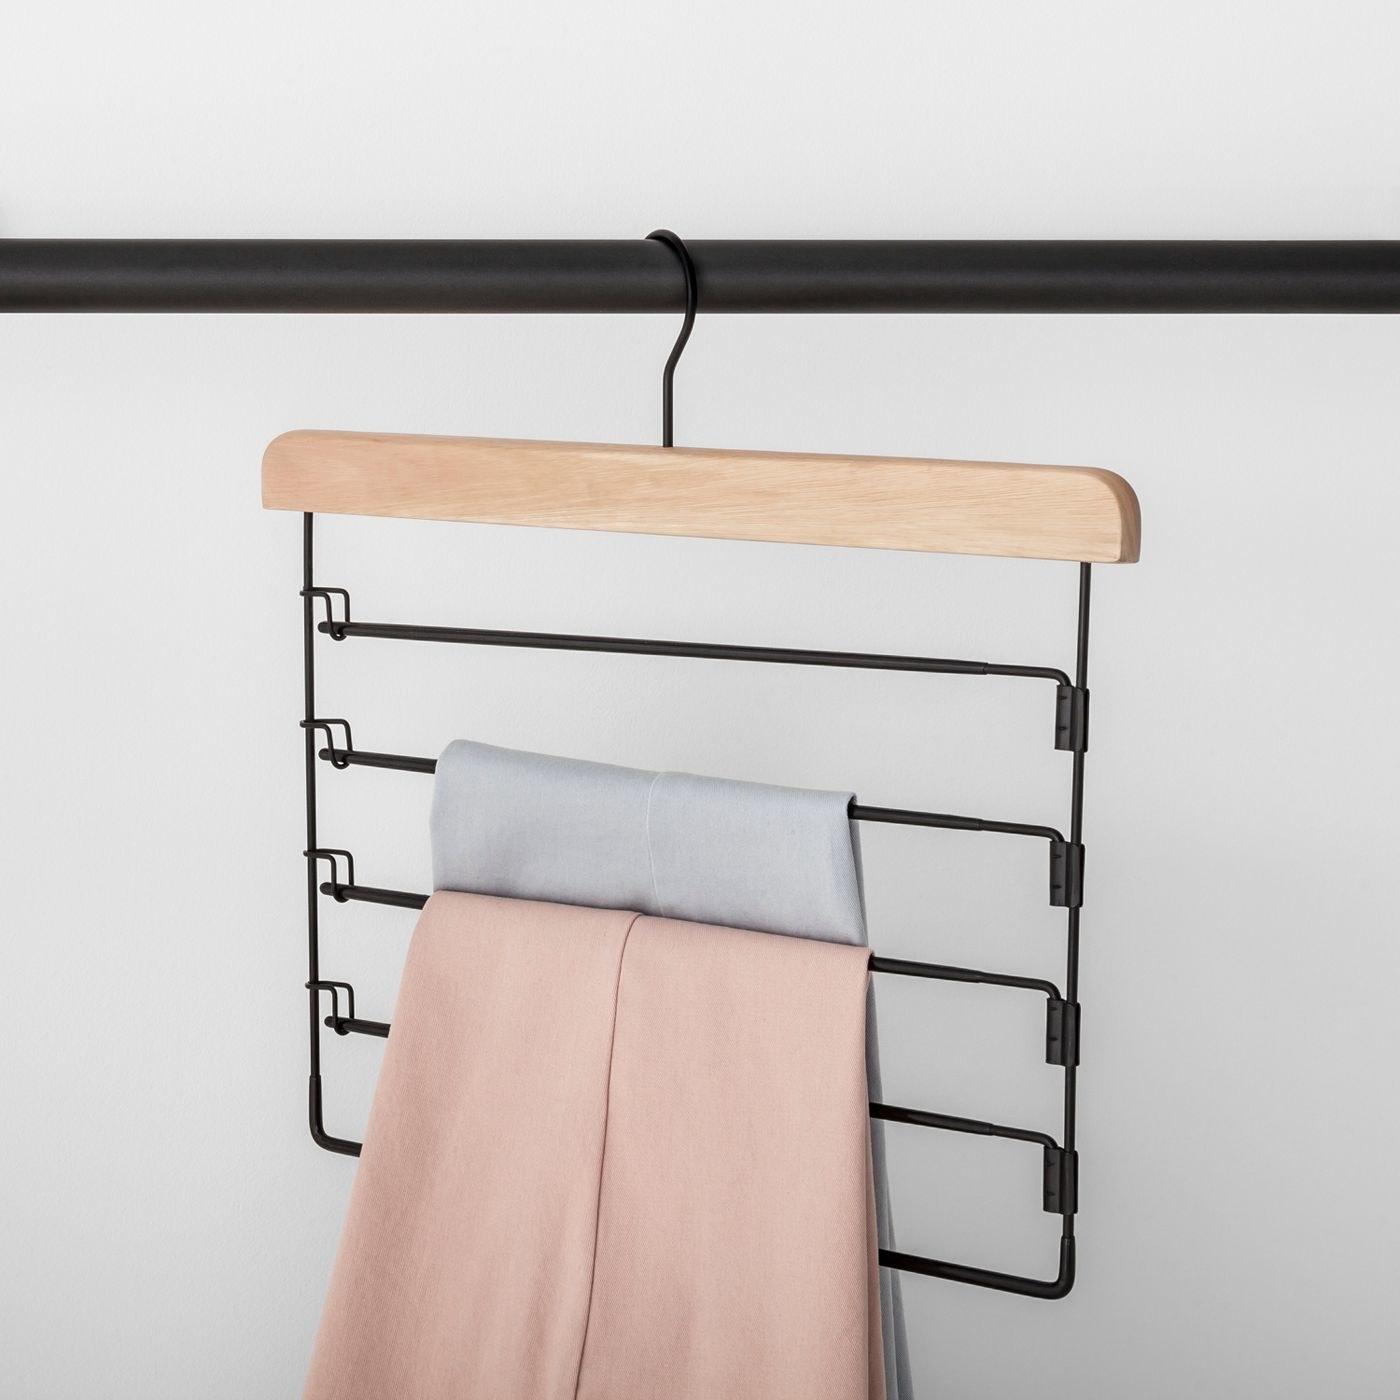 Pants hanger with two pairs of pants on it